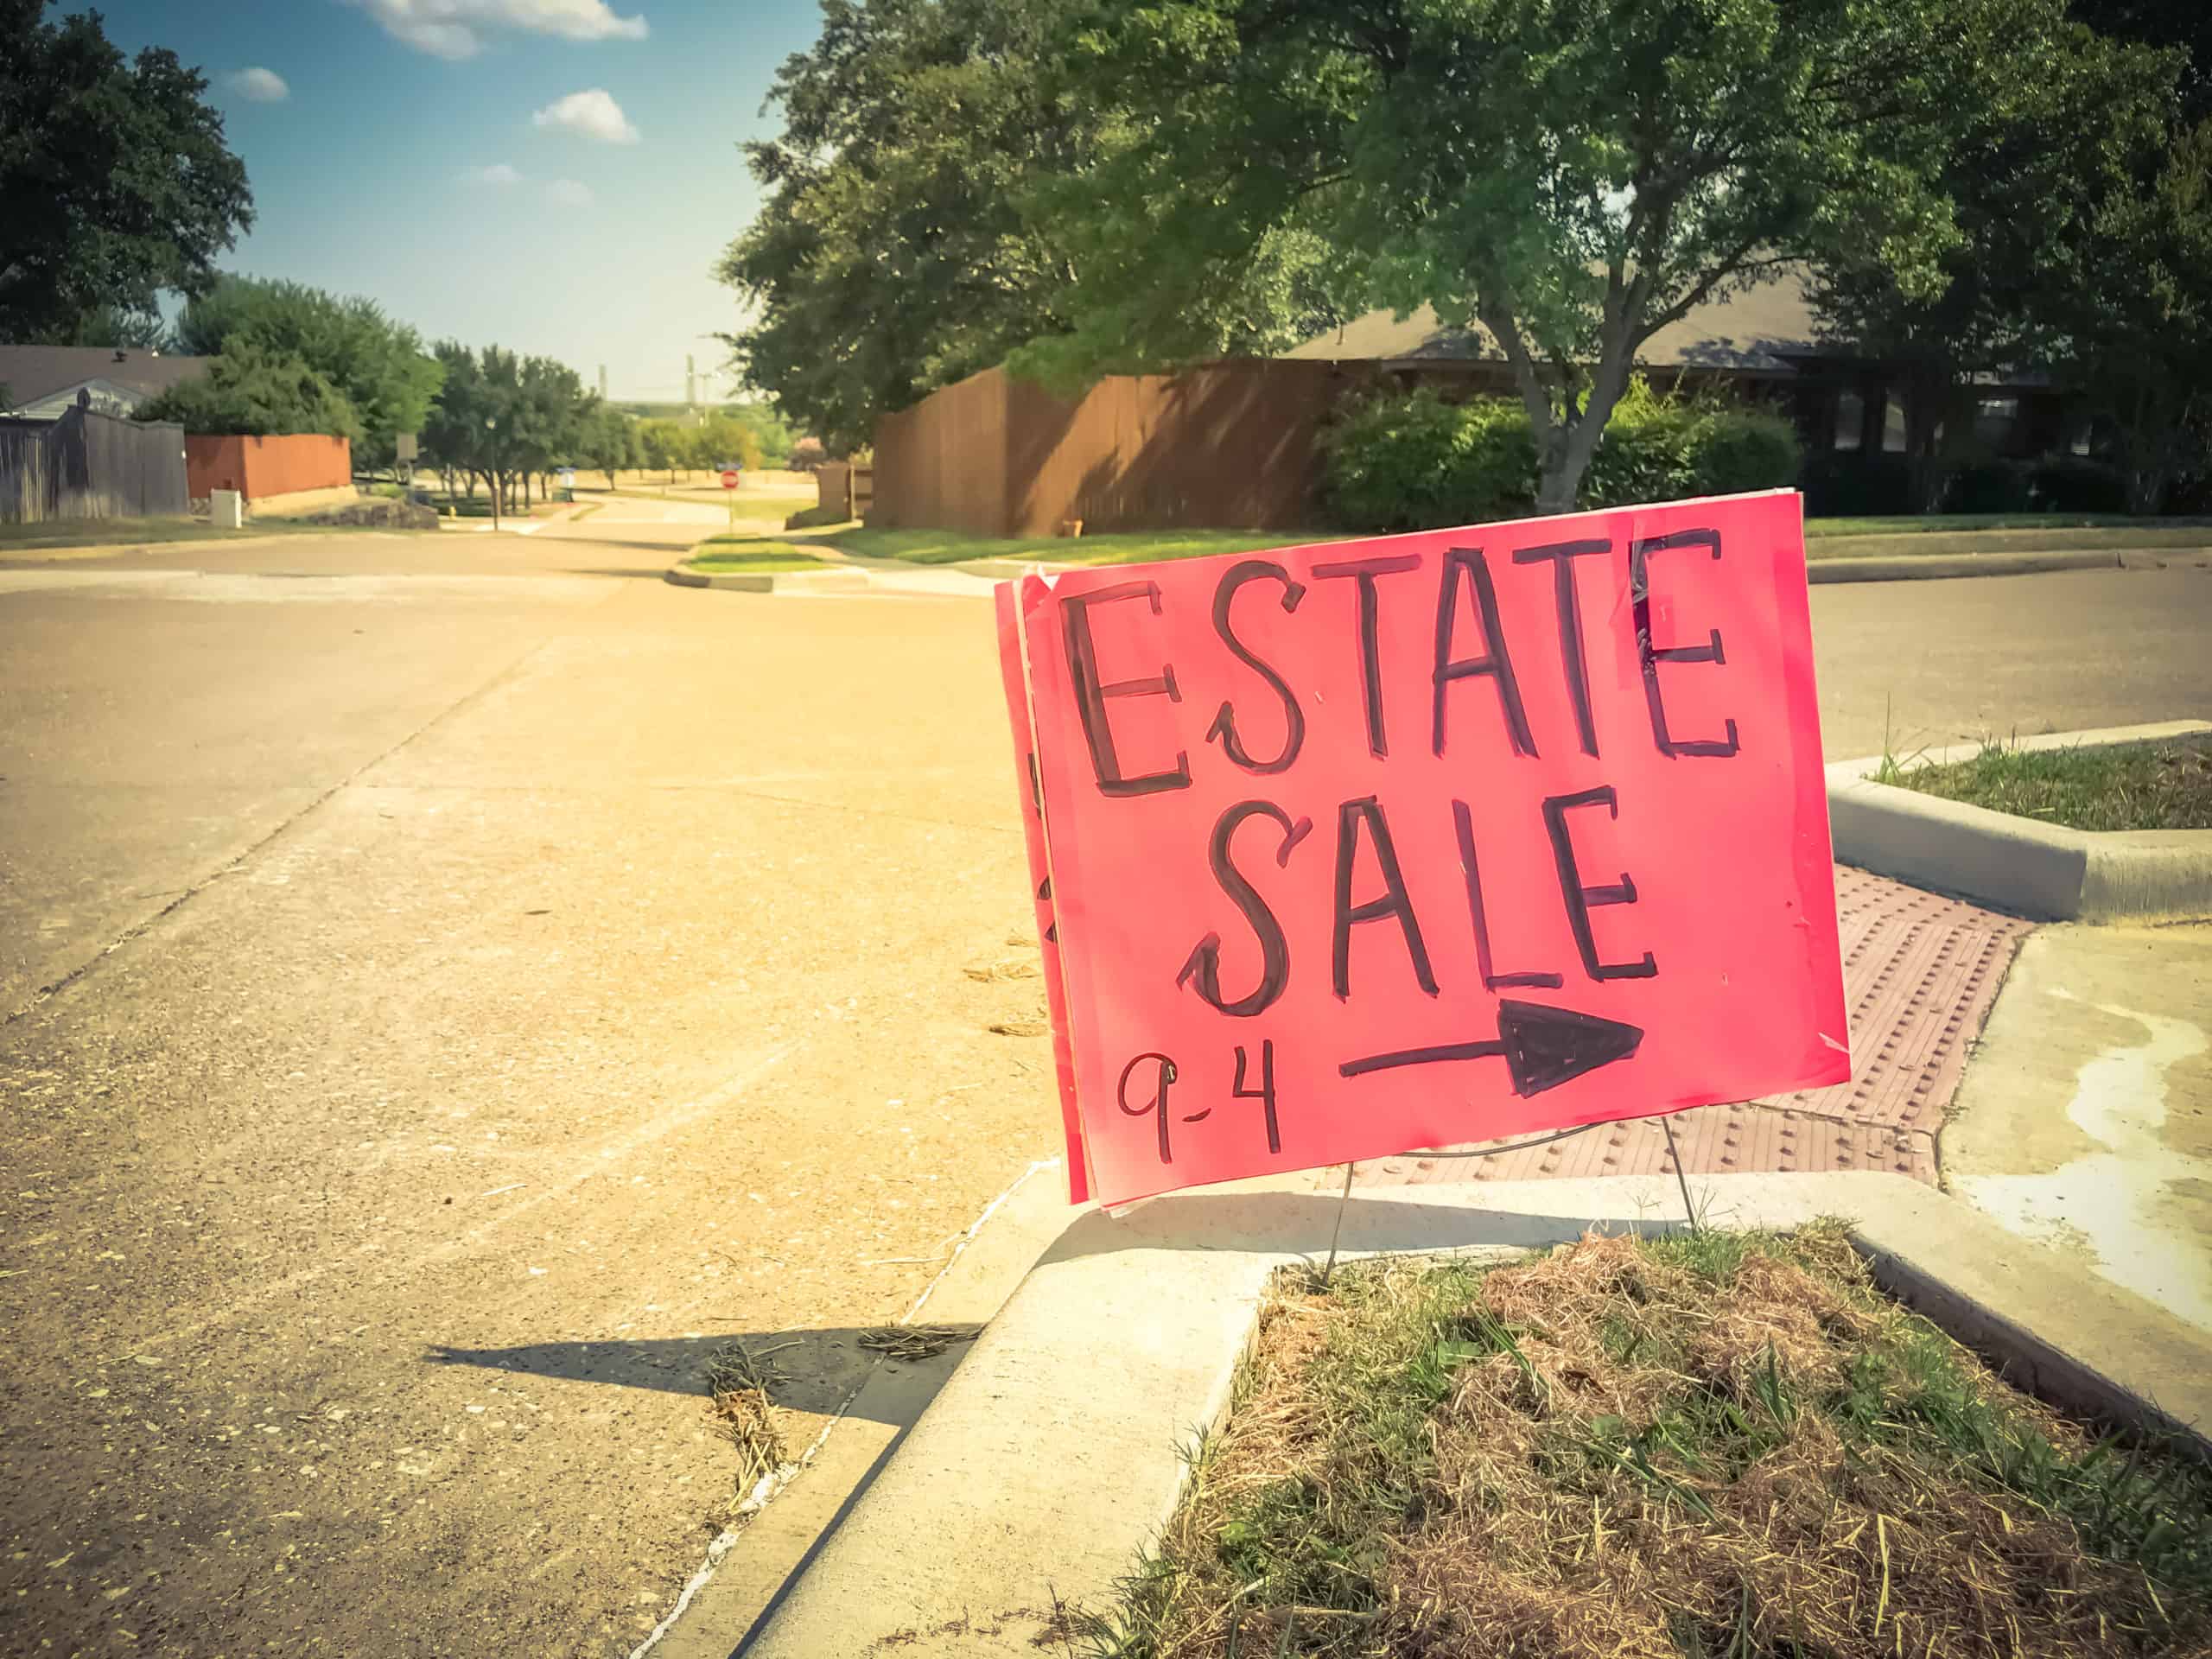 Estate sale sign; an opportunity to purchase items to flip when building wealth.